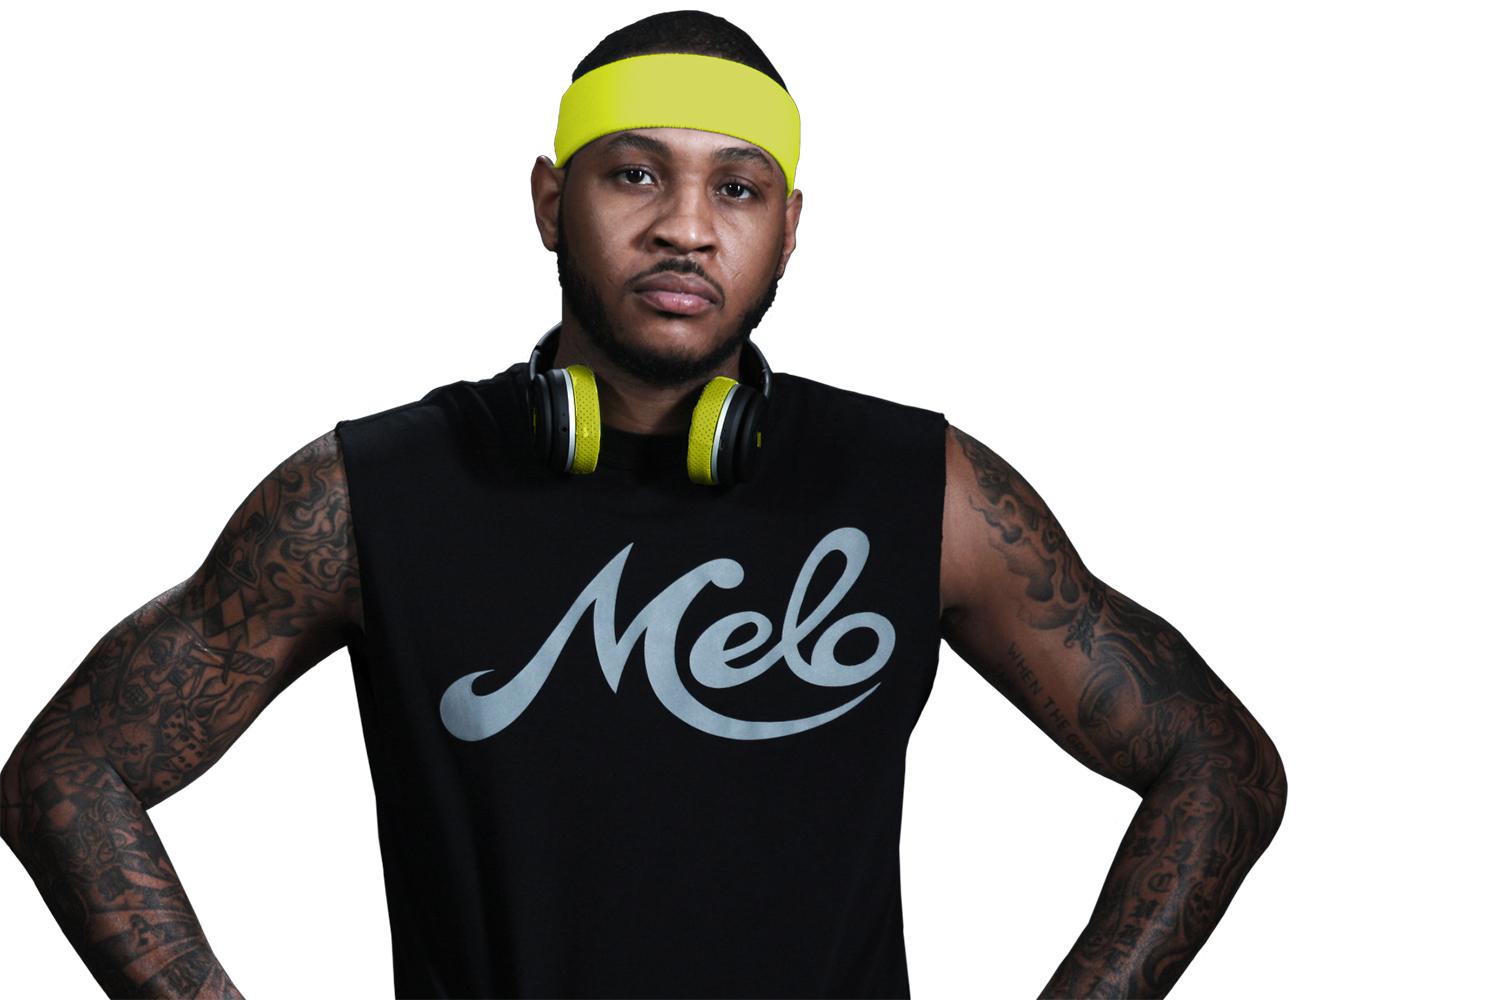 SMS sport melo yellow